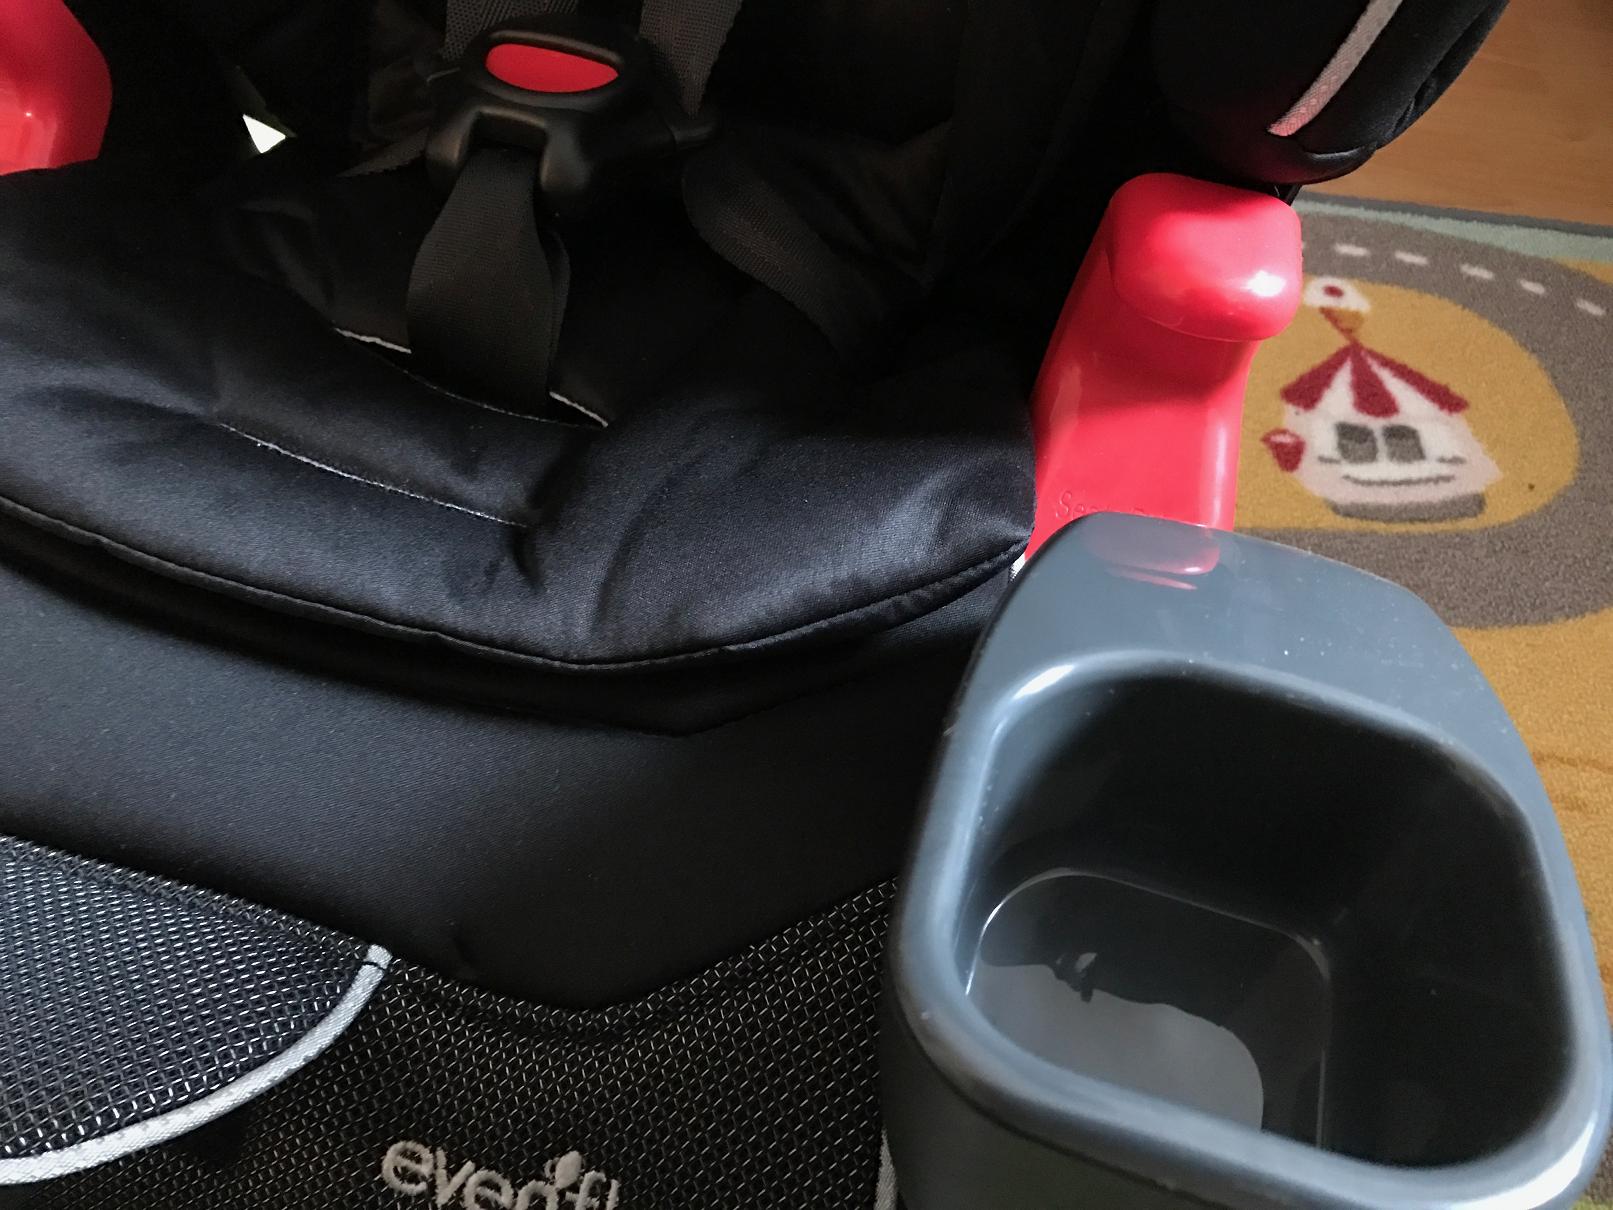 evenflo cup holder